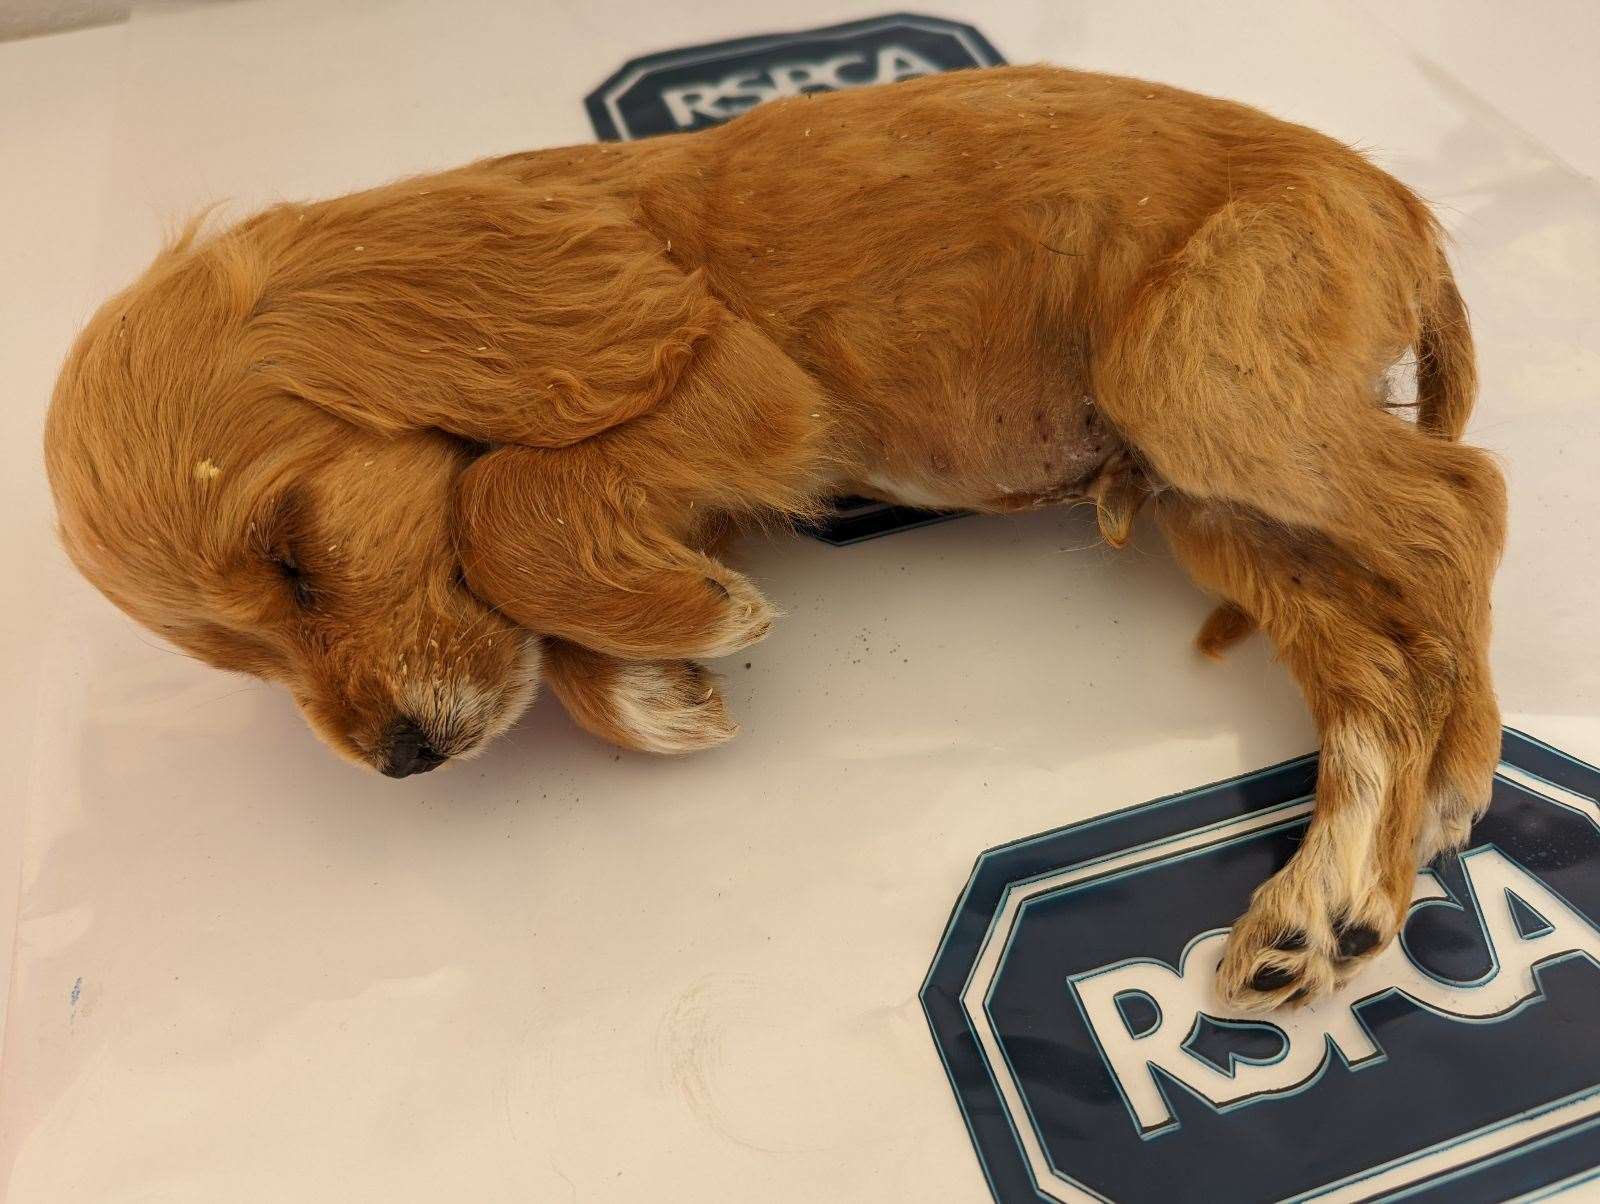 The golden cocker spaniel pup was found on Friday, August 19, four days before another was found on the roadside.. Picture: RSPCA